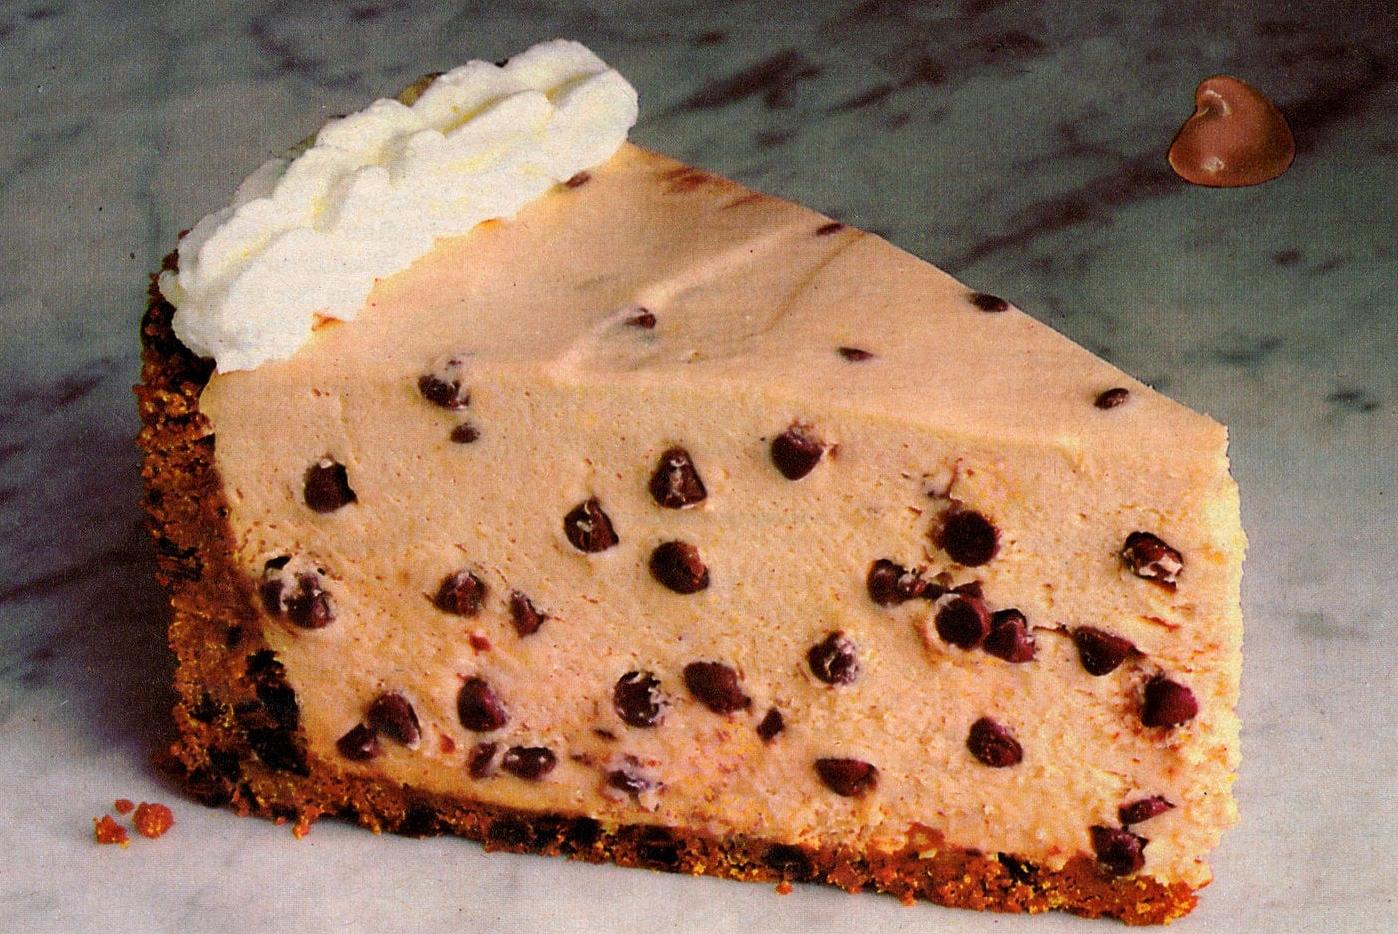  Indulge in a slice of our rich and decadent mocha chip cheesecake